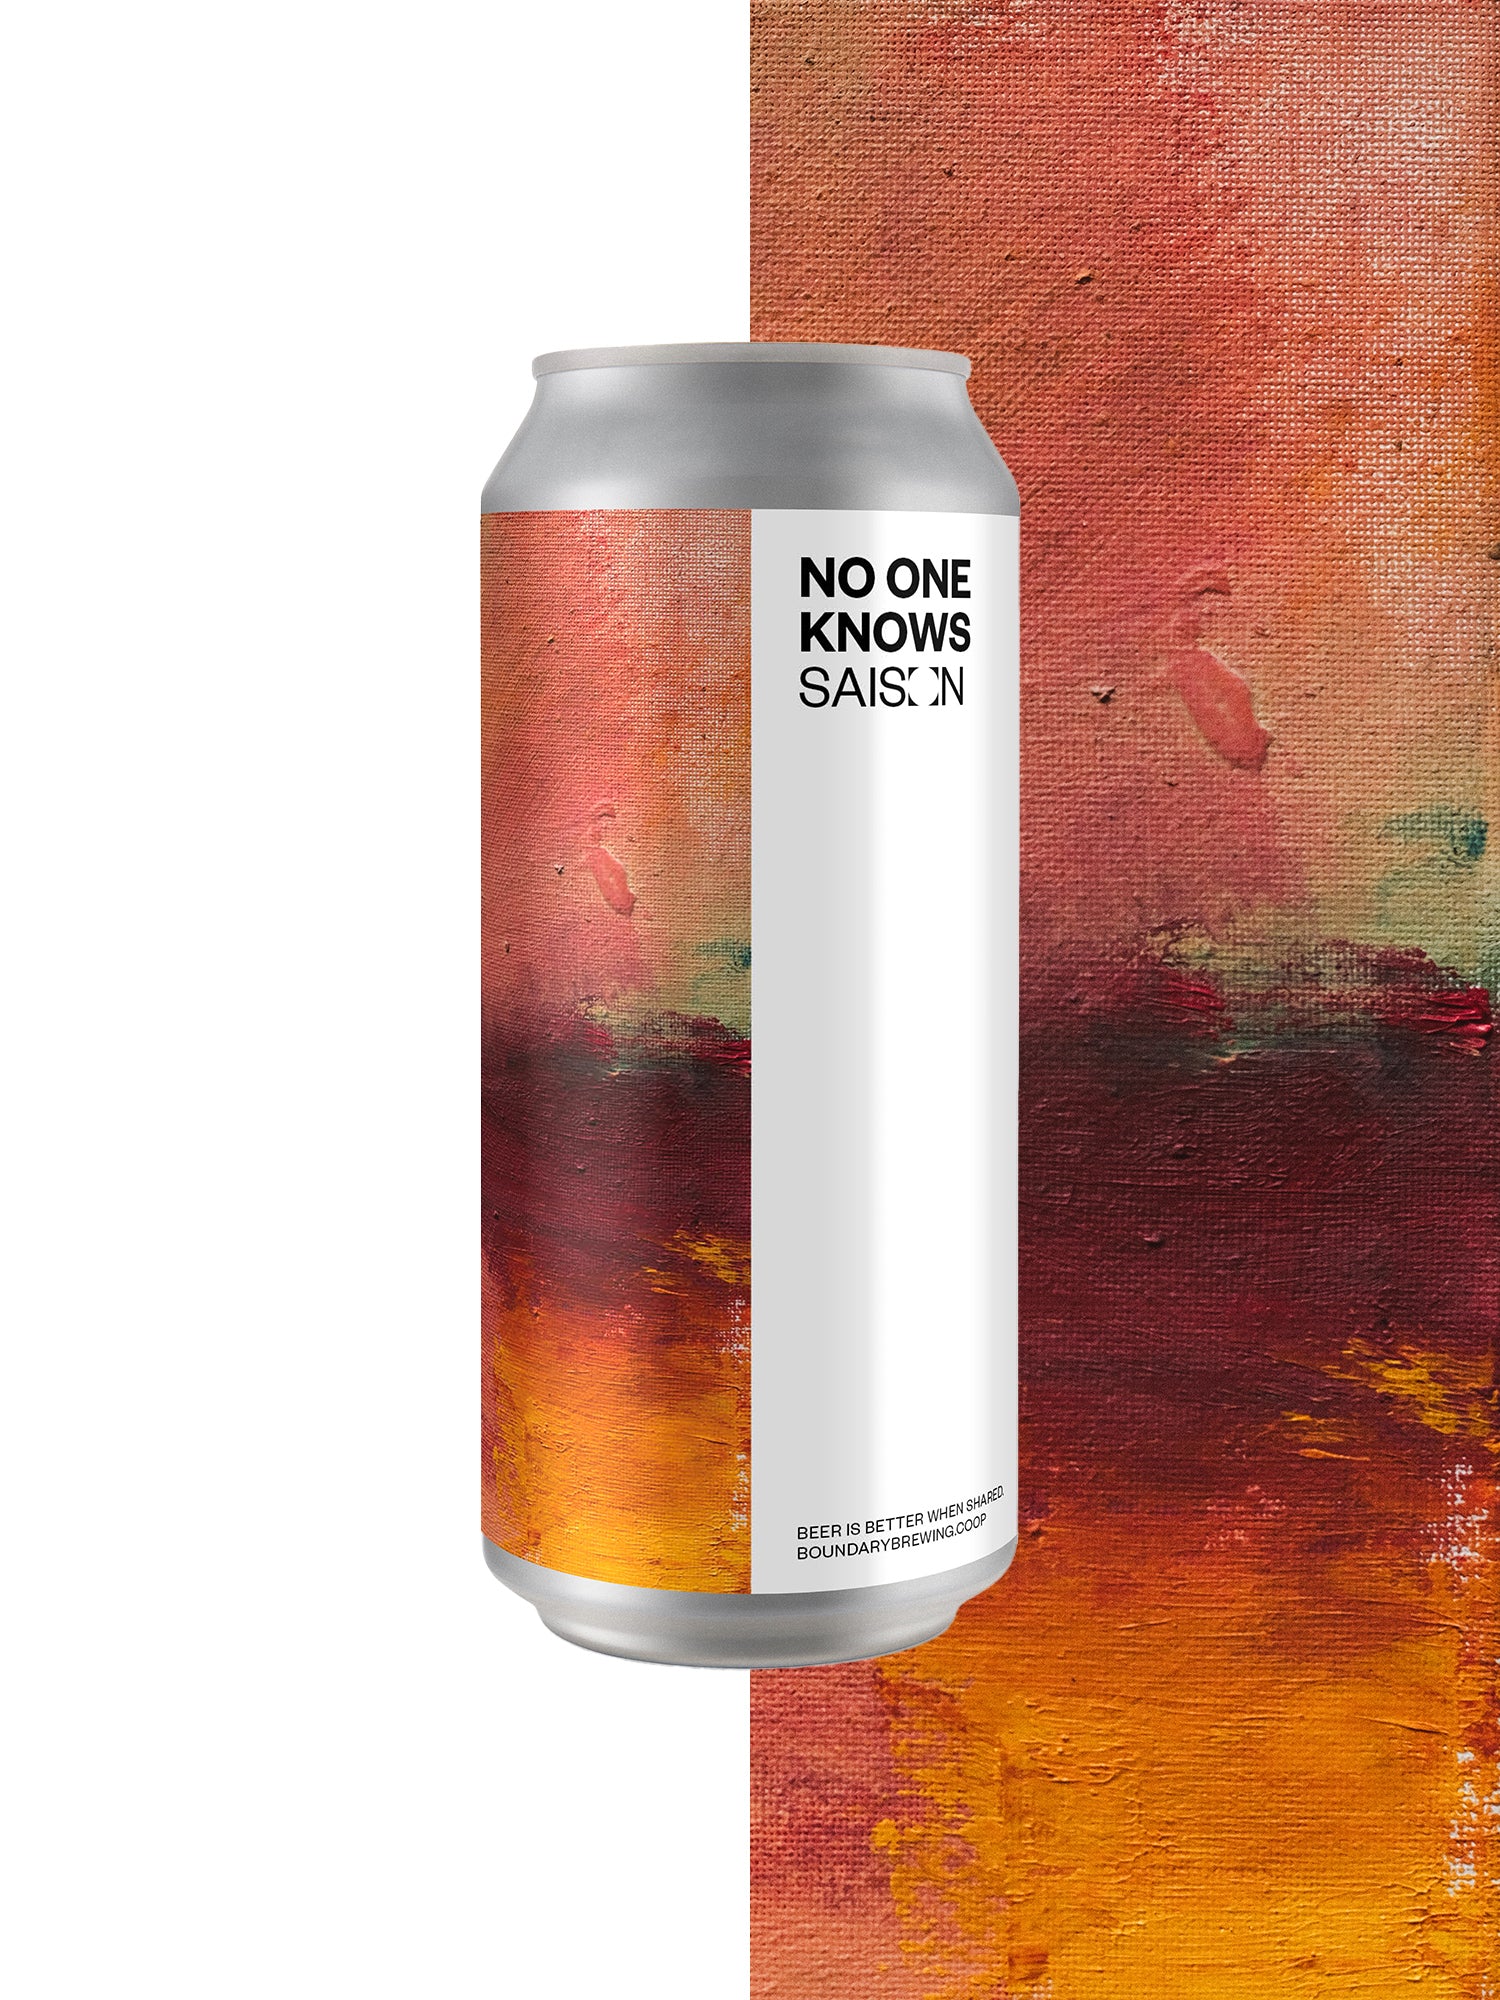 NO ONE KNOWS Saison (4-pack) 5.7%